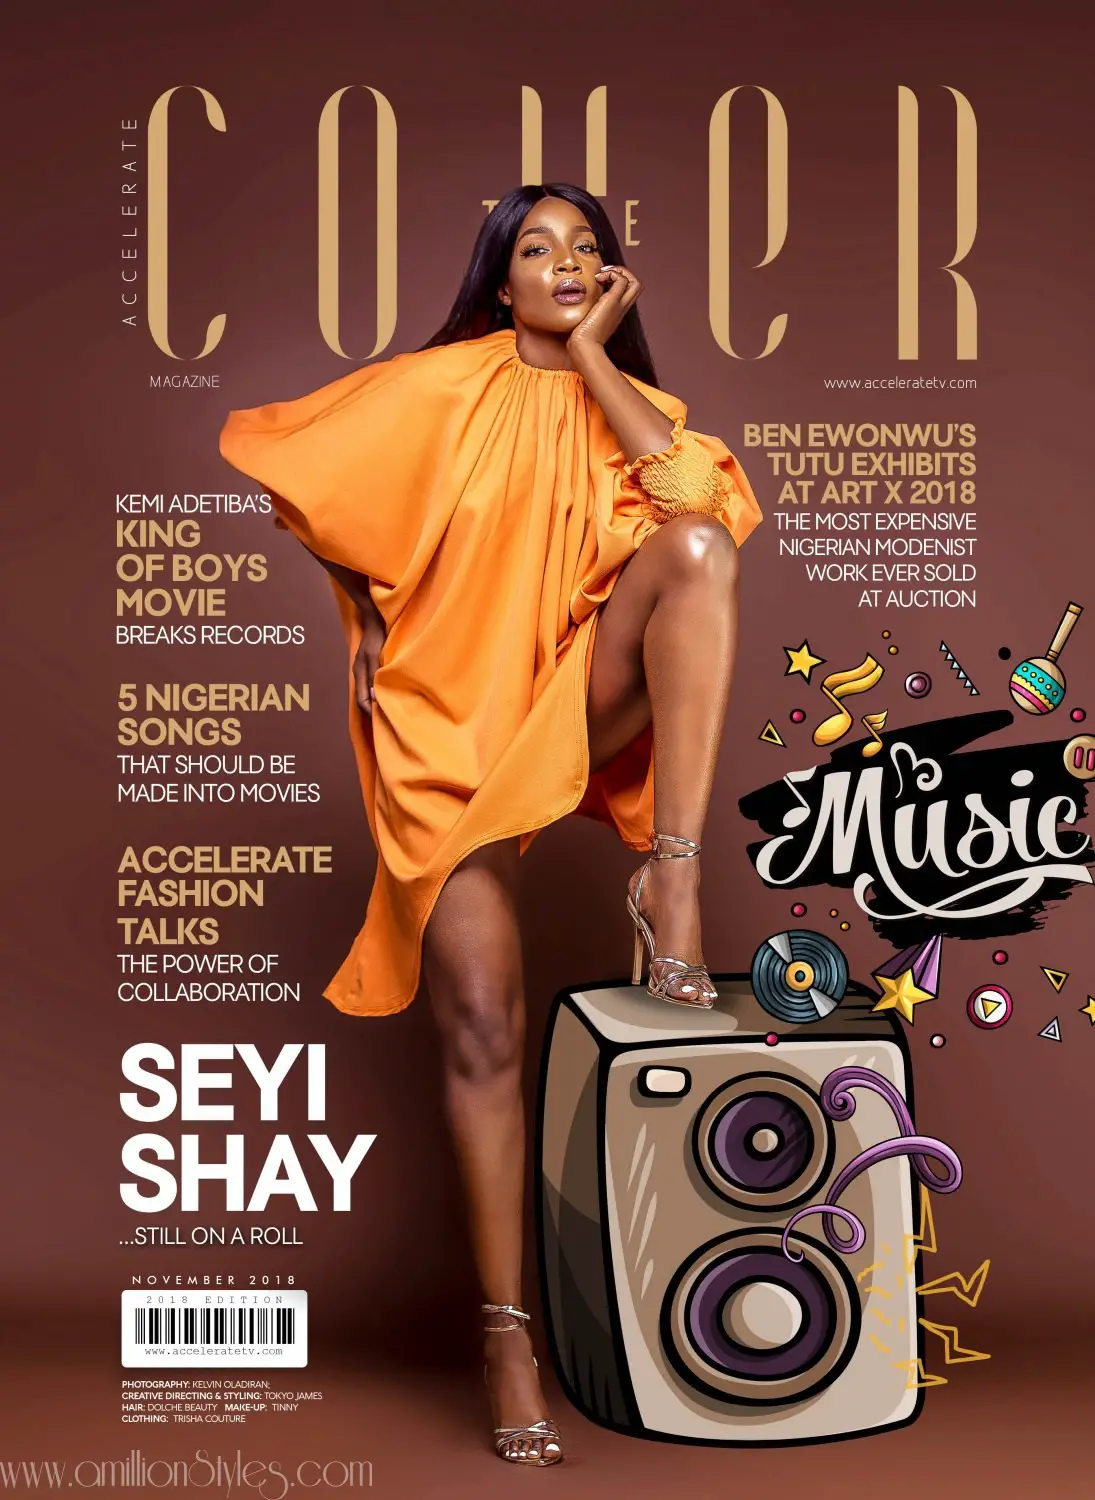 Seyi Shay Gives Off Melanin Vibes On Accelerate TV’s ‘The Cover’ For November 2018